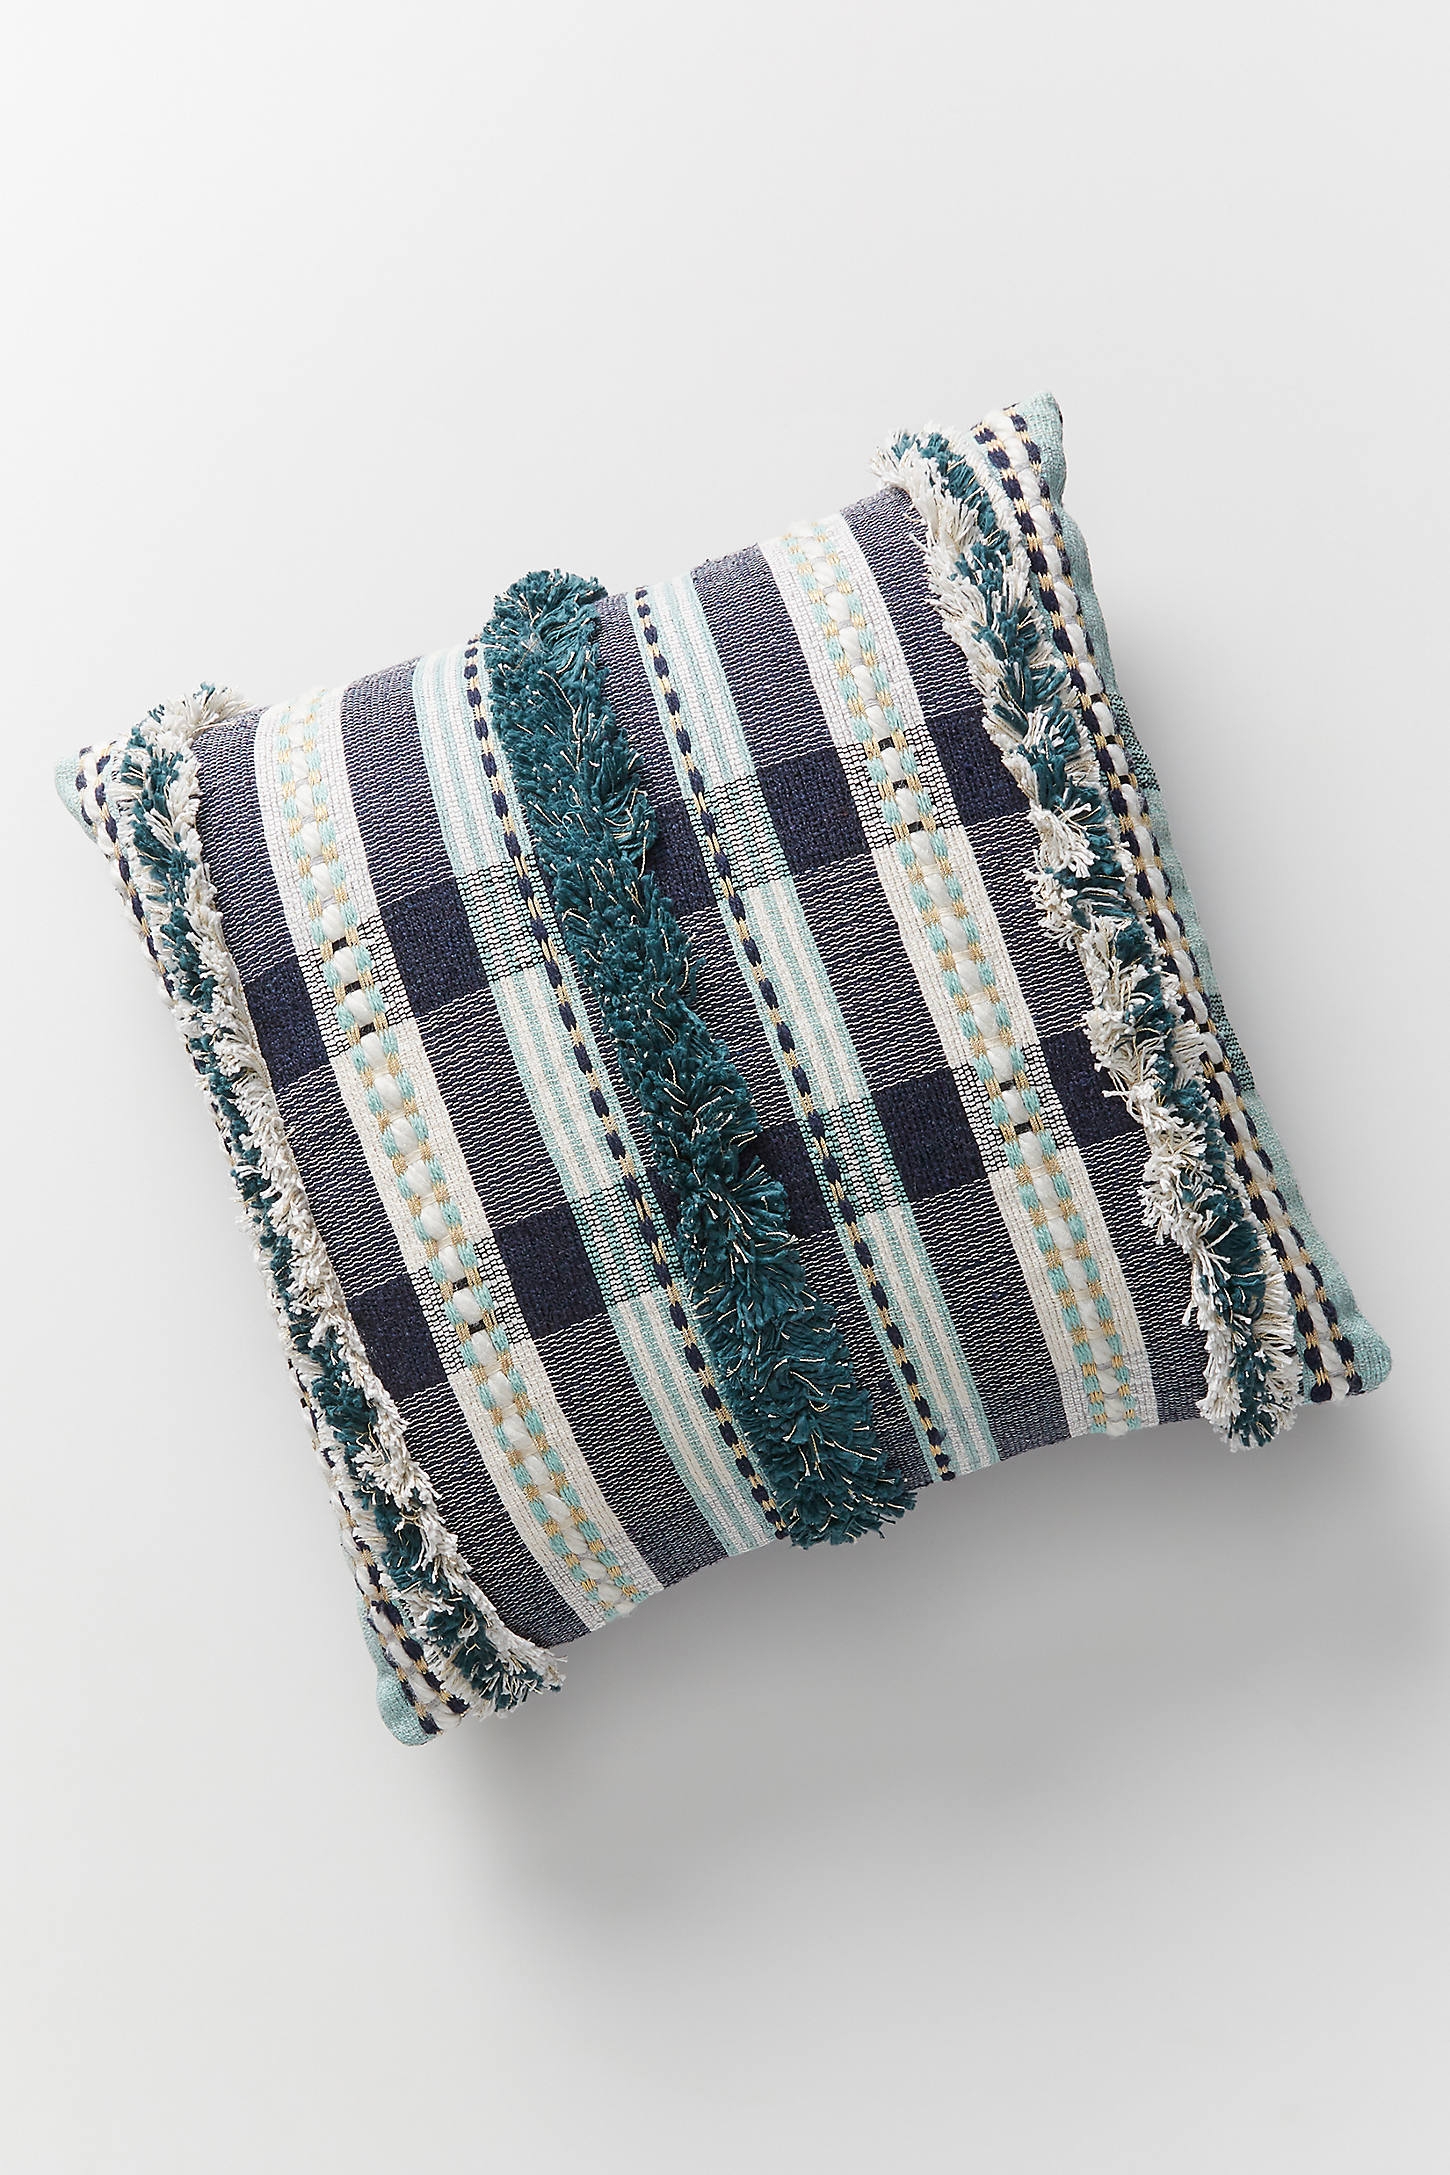 Tufted Plaid Sweetheart Pillow - Image 0